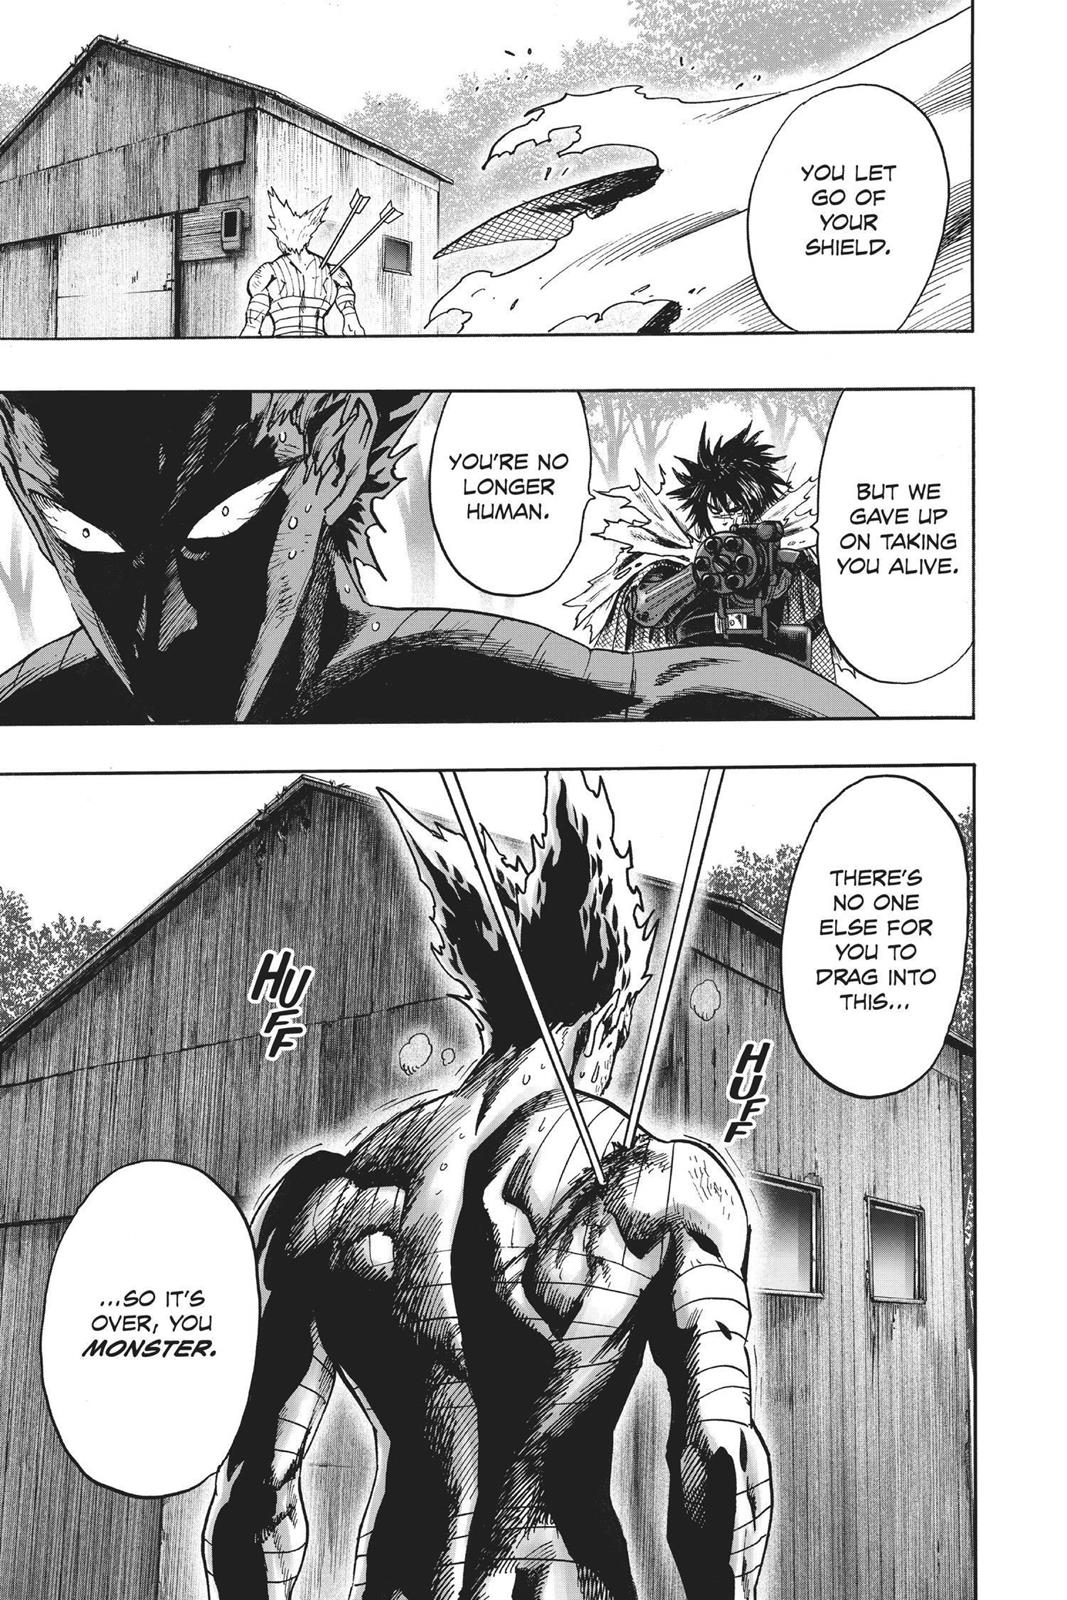 One-Punch Man, Punch 82 image 39